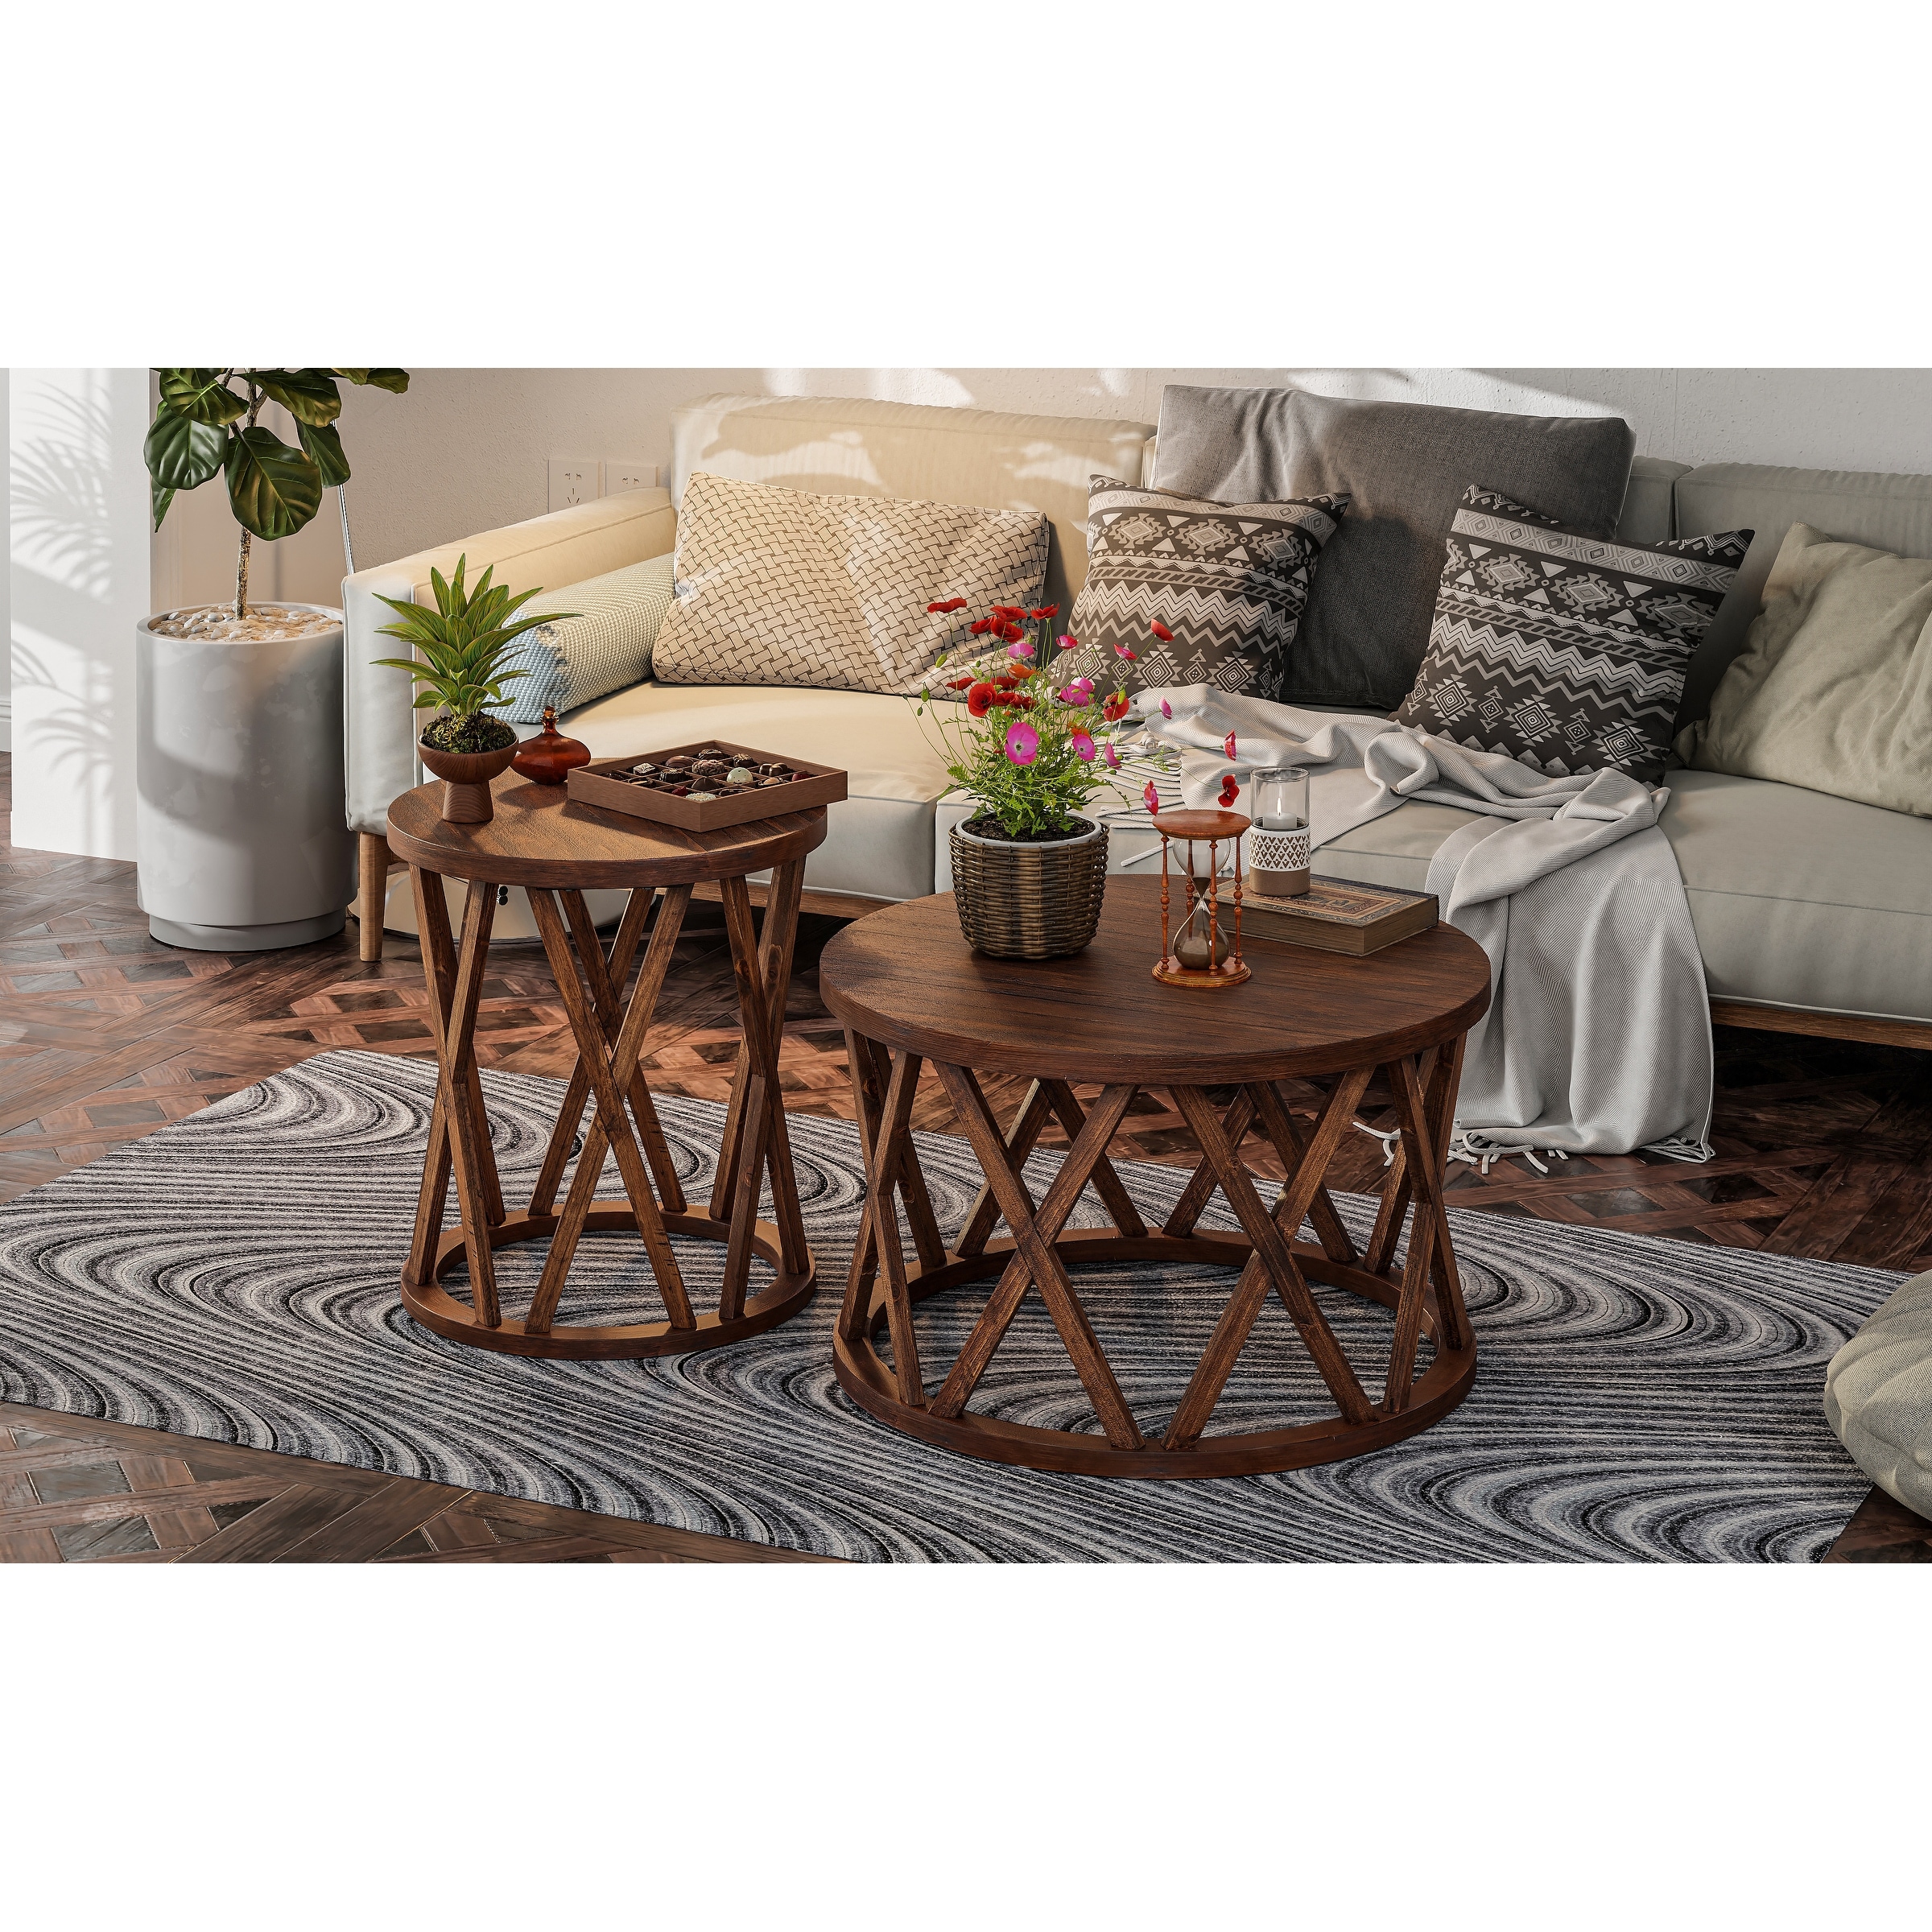 COZAYH Rustic Farmhouse Coffee Table, Distressed Wood Top Table with Curved Motif Frame Base for Boho, French Country Decor, Round, Natural, Beige